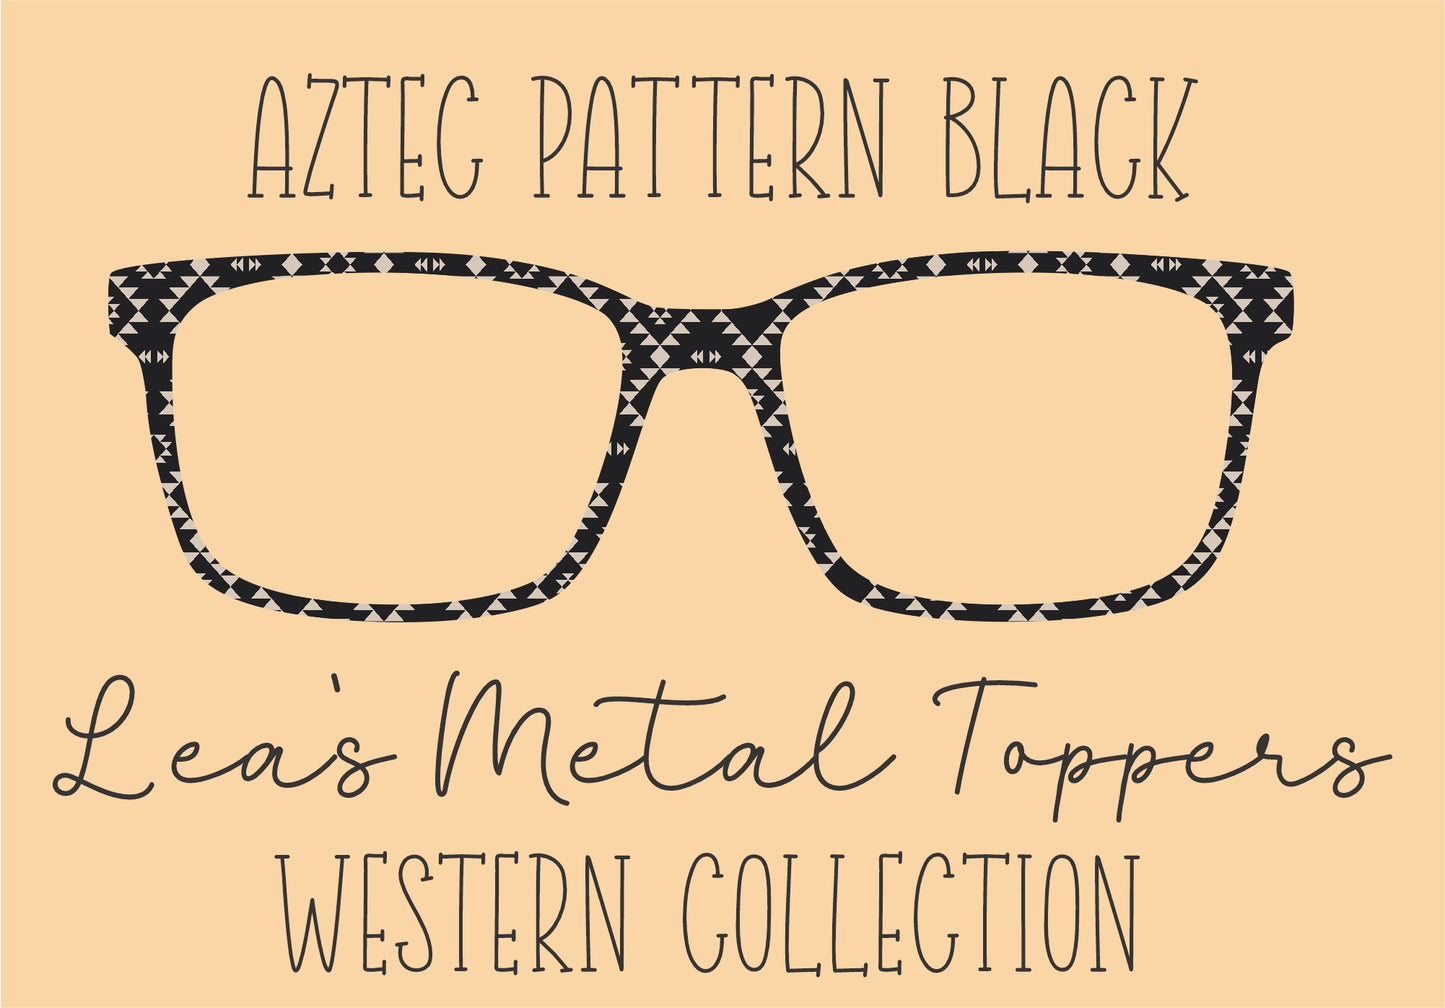 AZTEC PATTERN BLACK Eyewear Frame Toppers COMES WITH MAGNETS